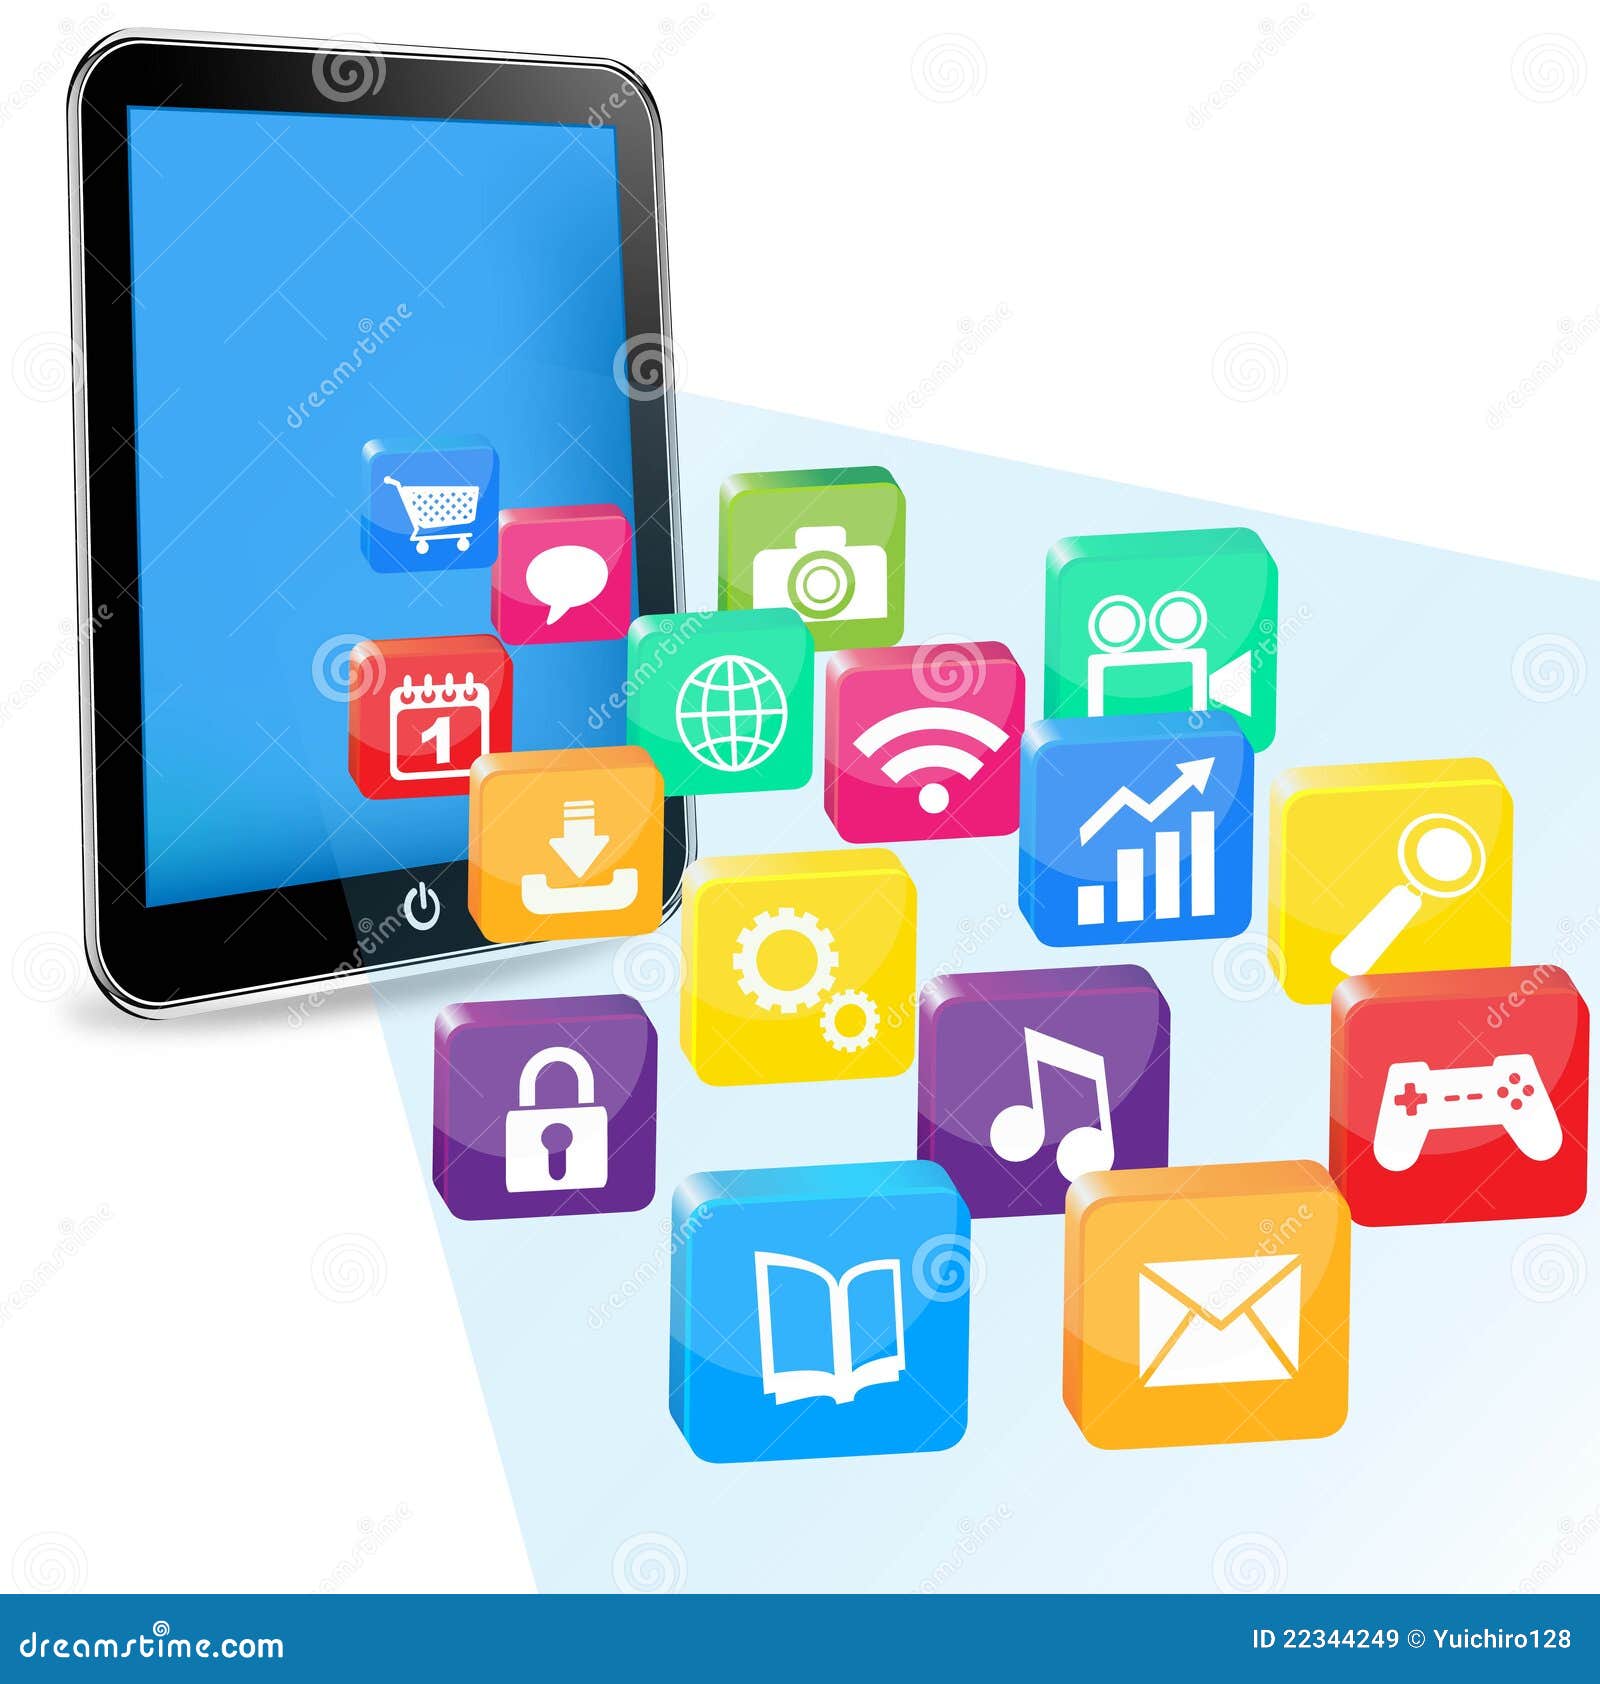 Tablet Pc Applications Royalty Free Stock Images - Image: 22344249